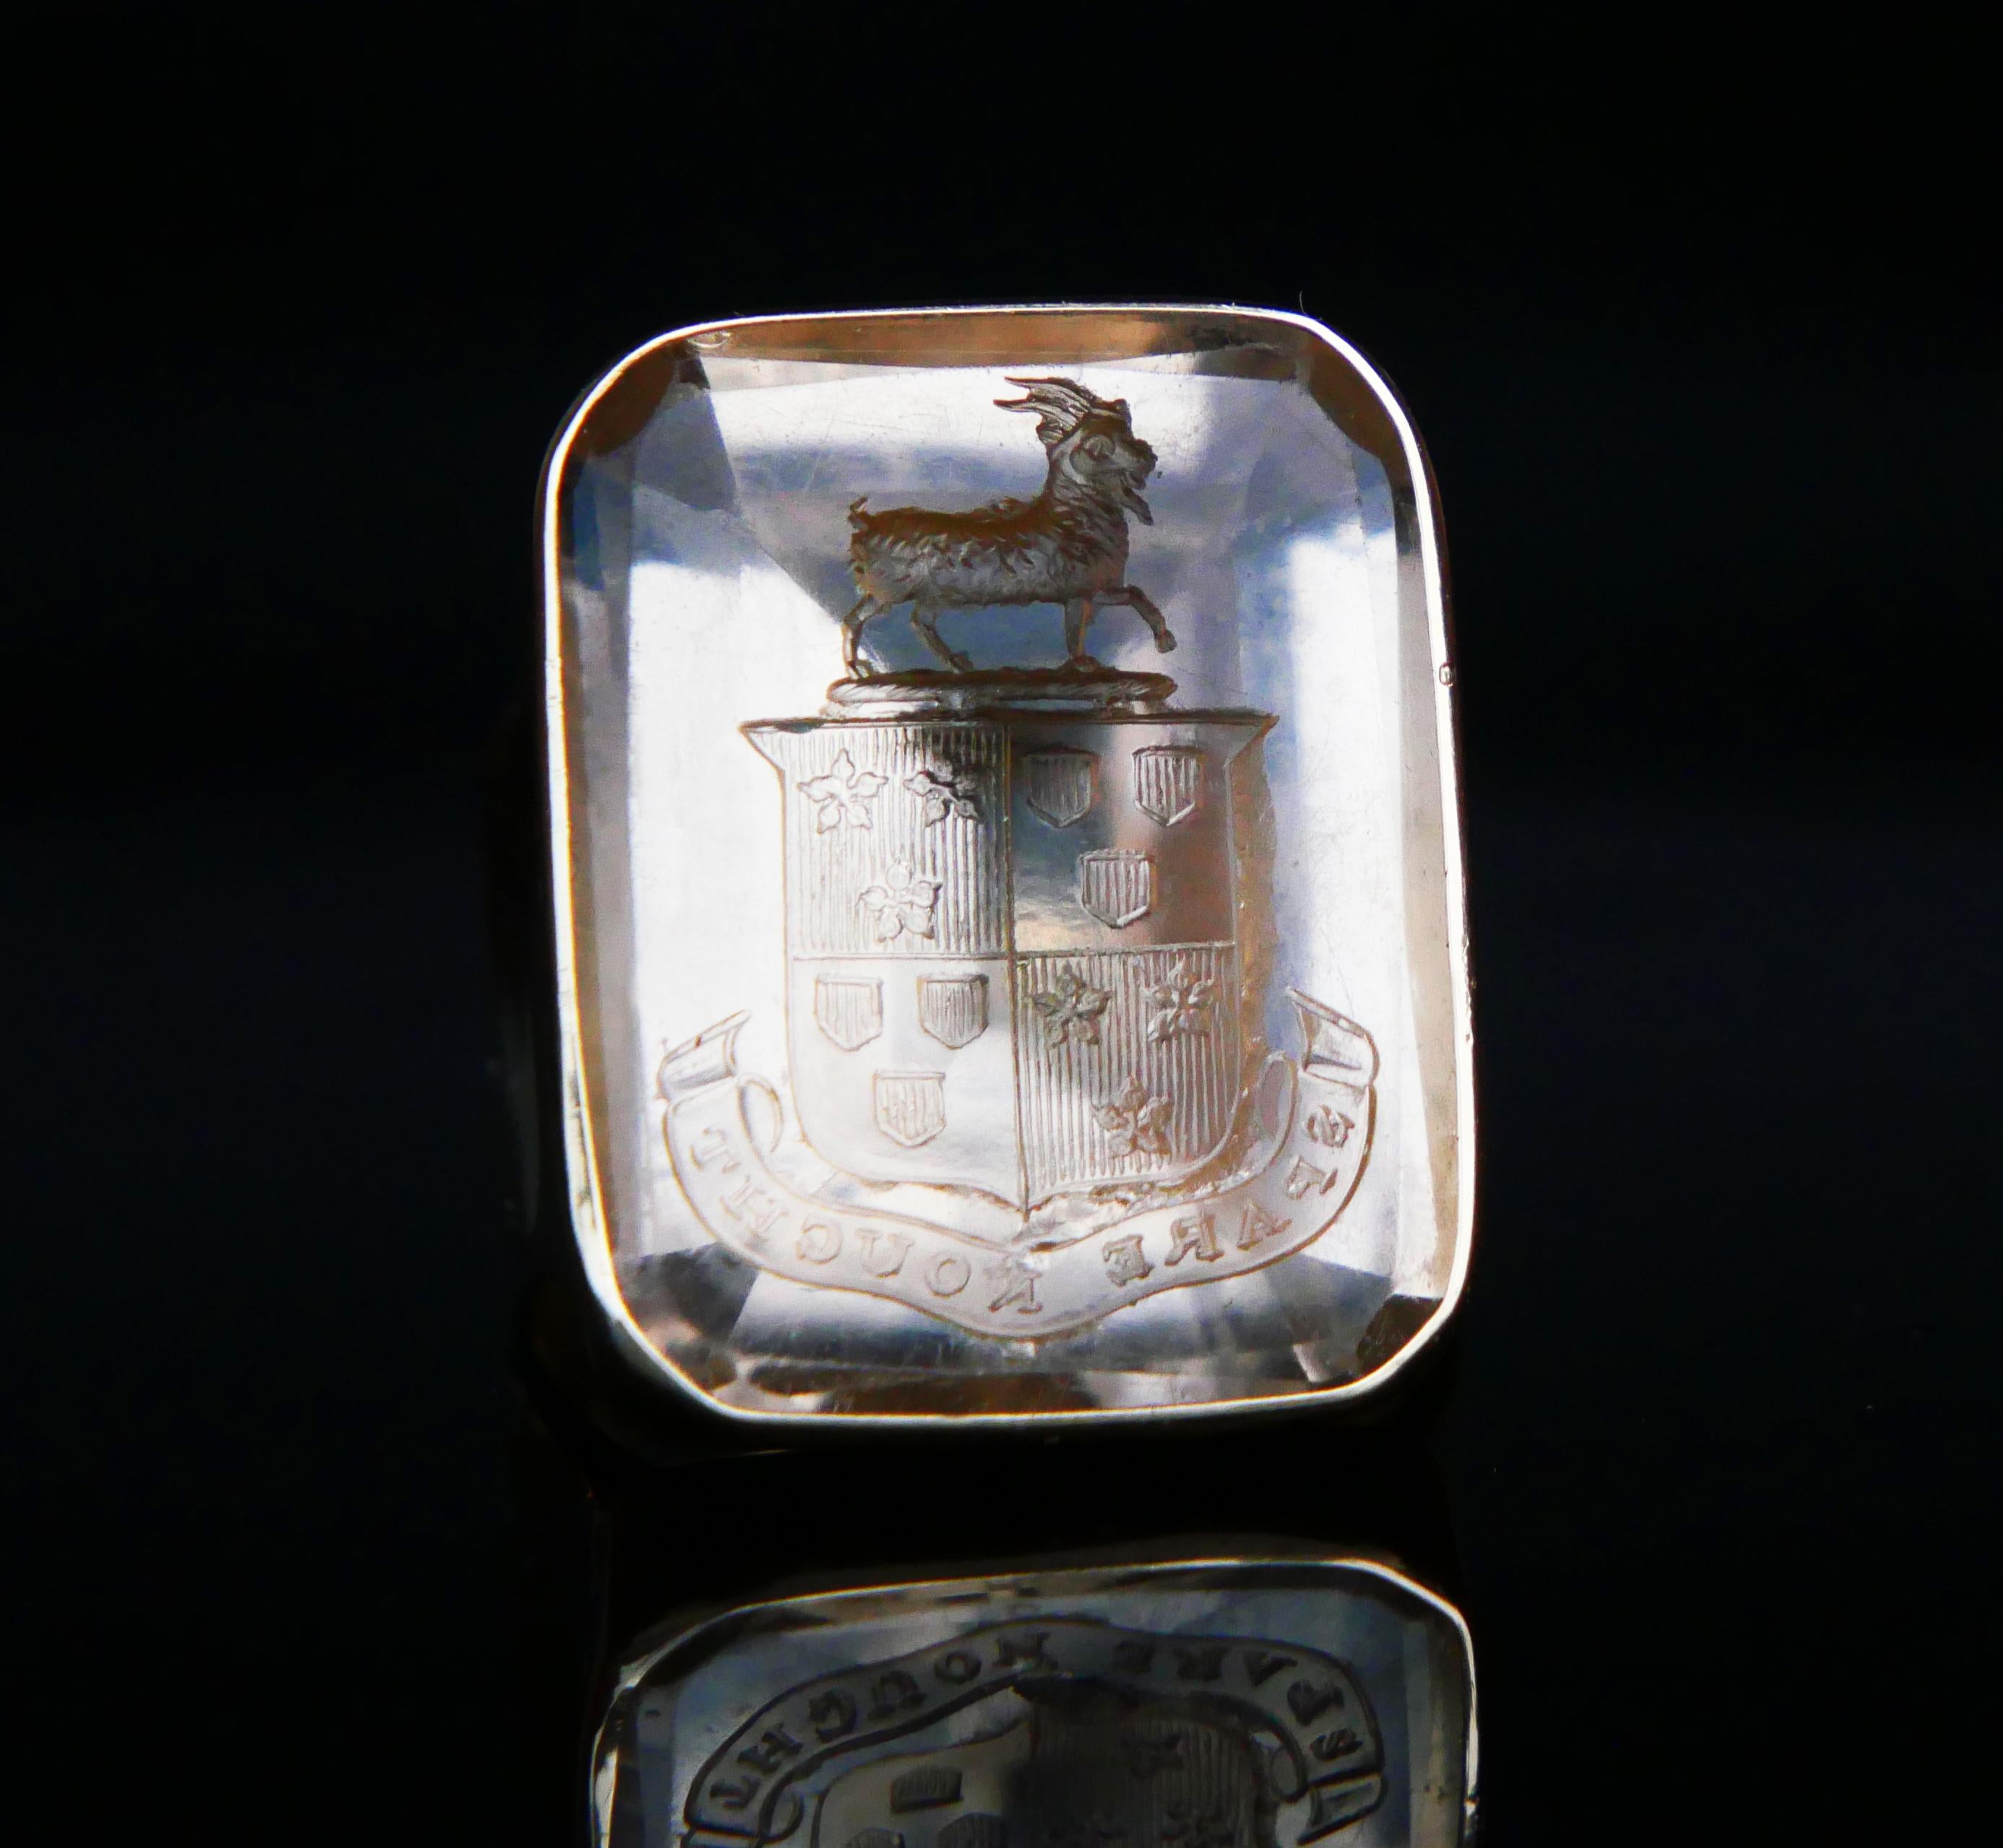 Great Intaglio Signet Ring with wide band and remarkable Coats of Arms of ancient Scotch Clan of Hay of Tweeddale ( moto 